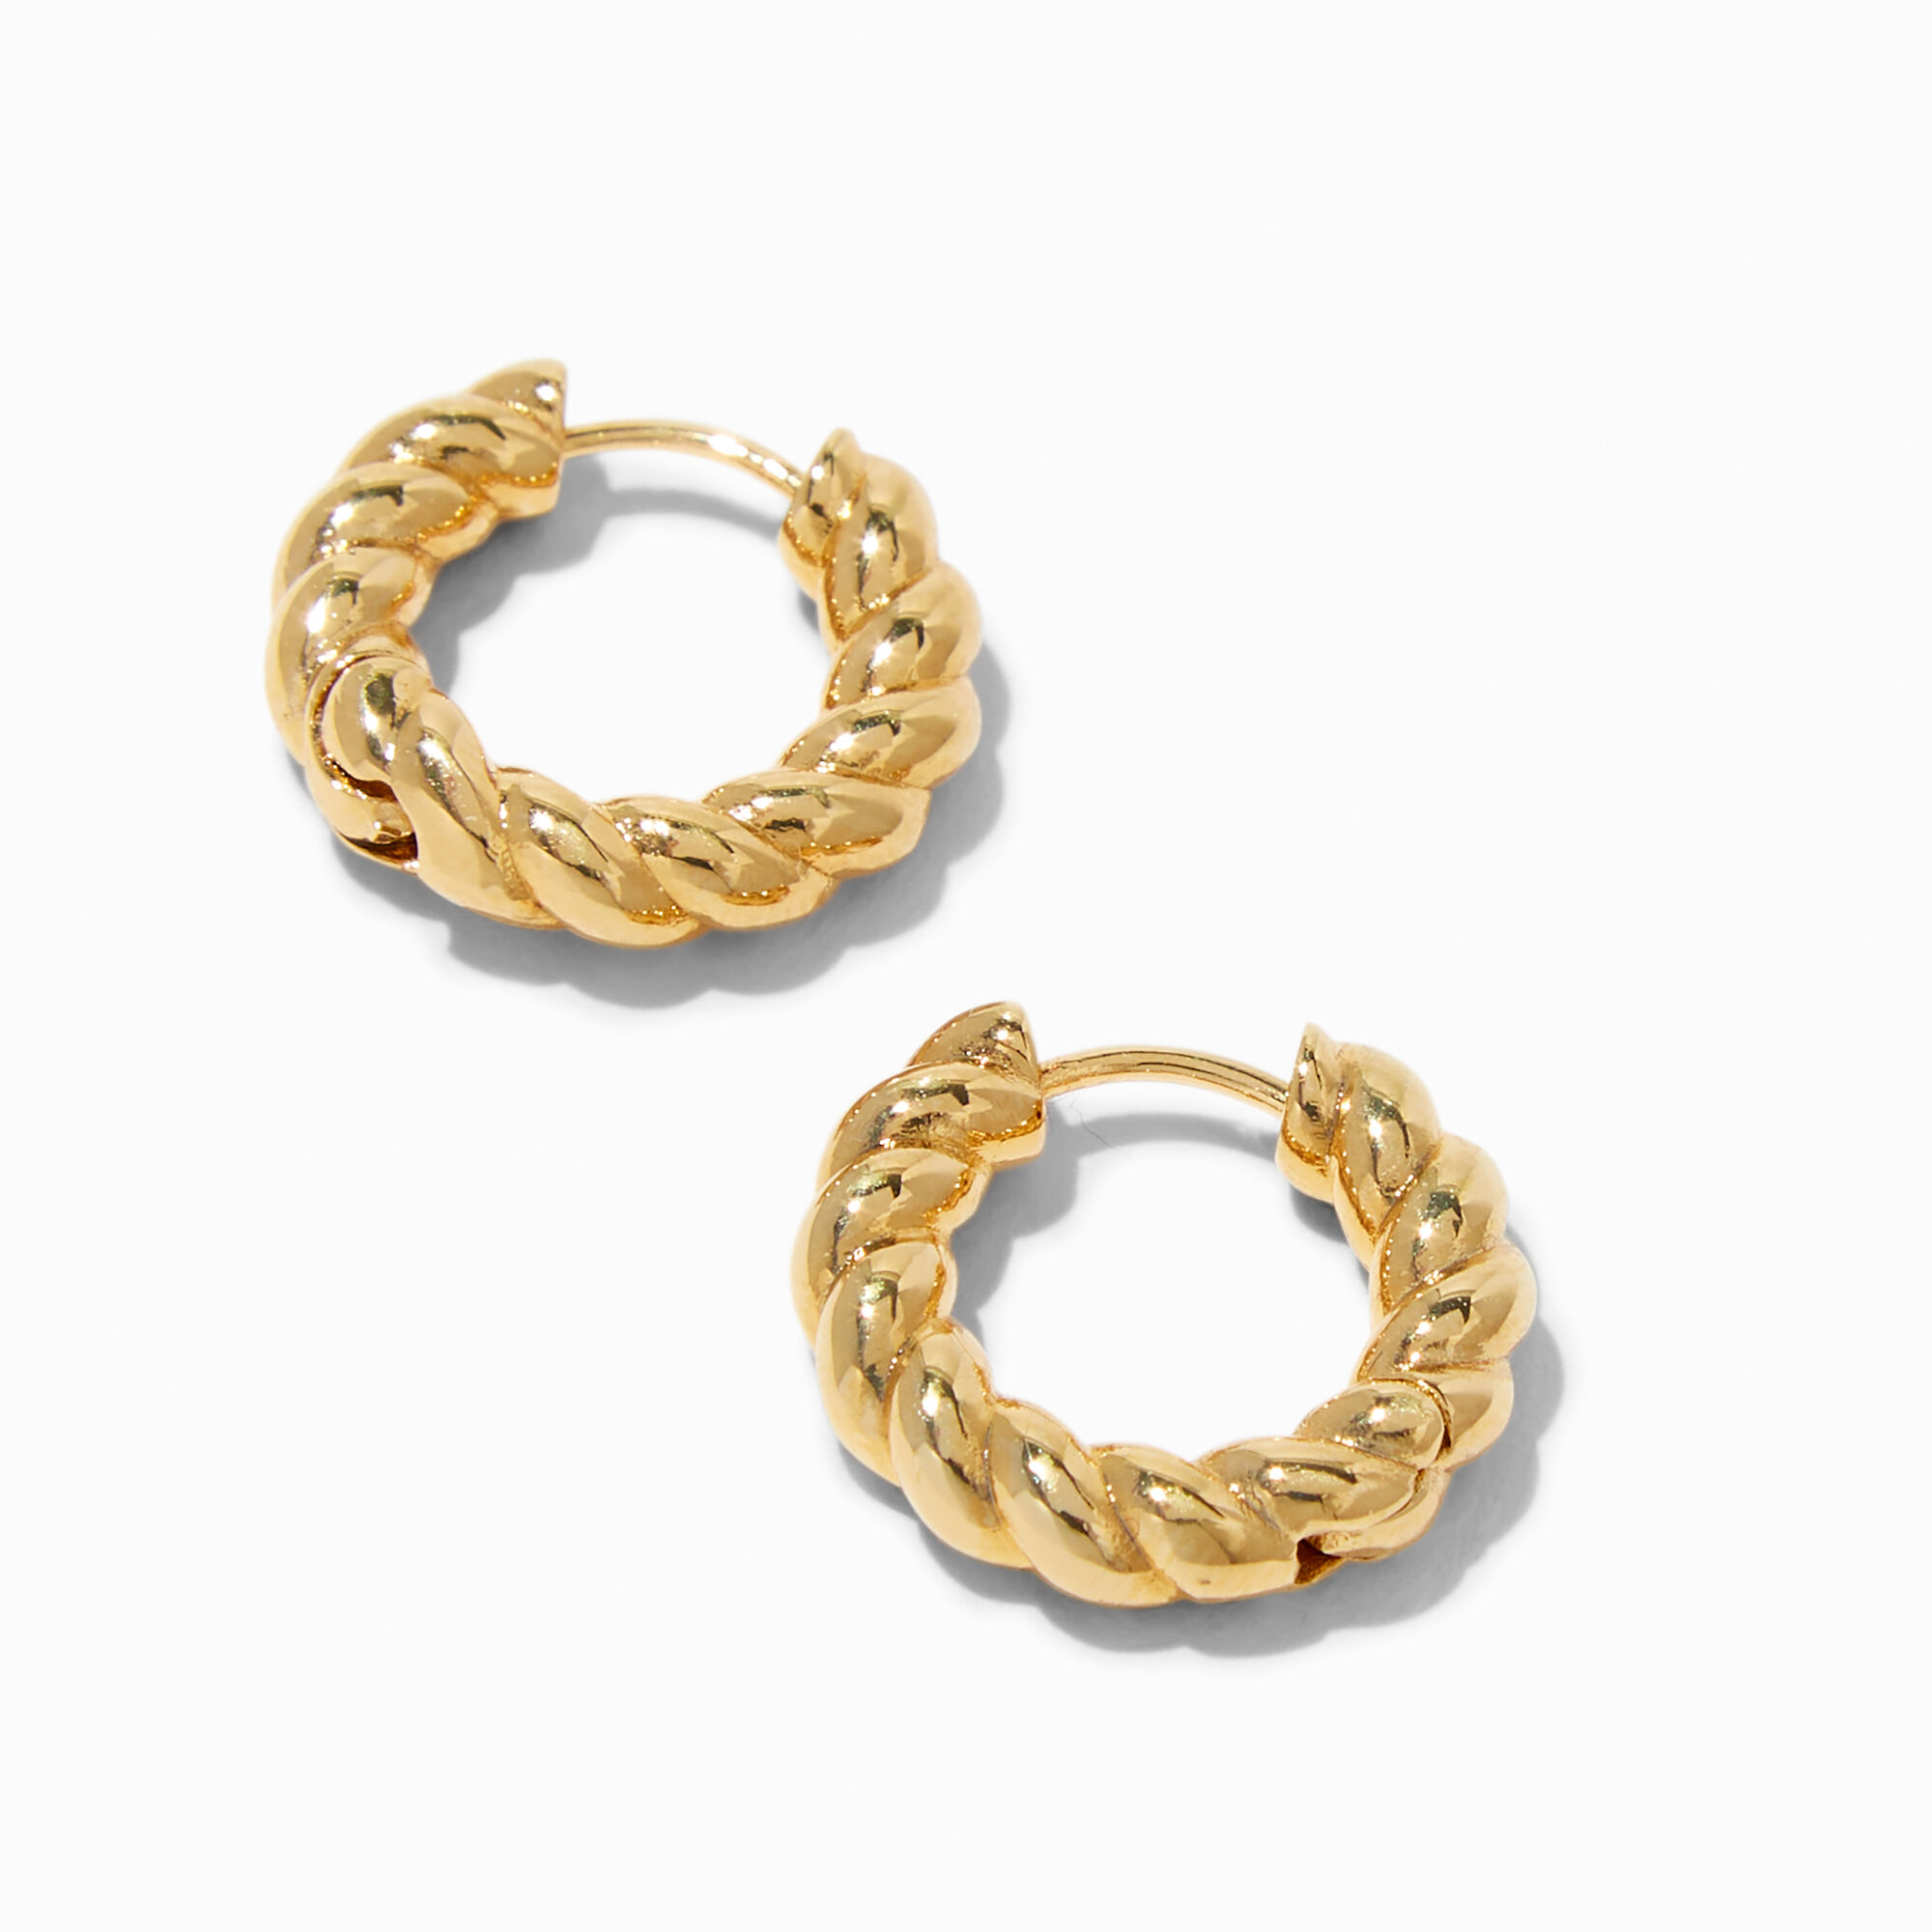 12 Packs: 60 ct. (720 total) Gold Mix Hoop Earring Wires by Bead Landing™